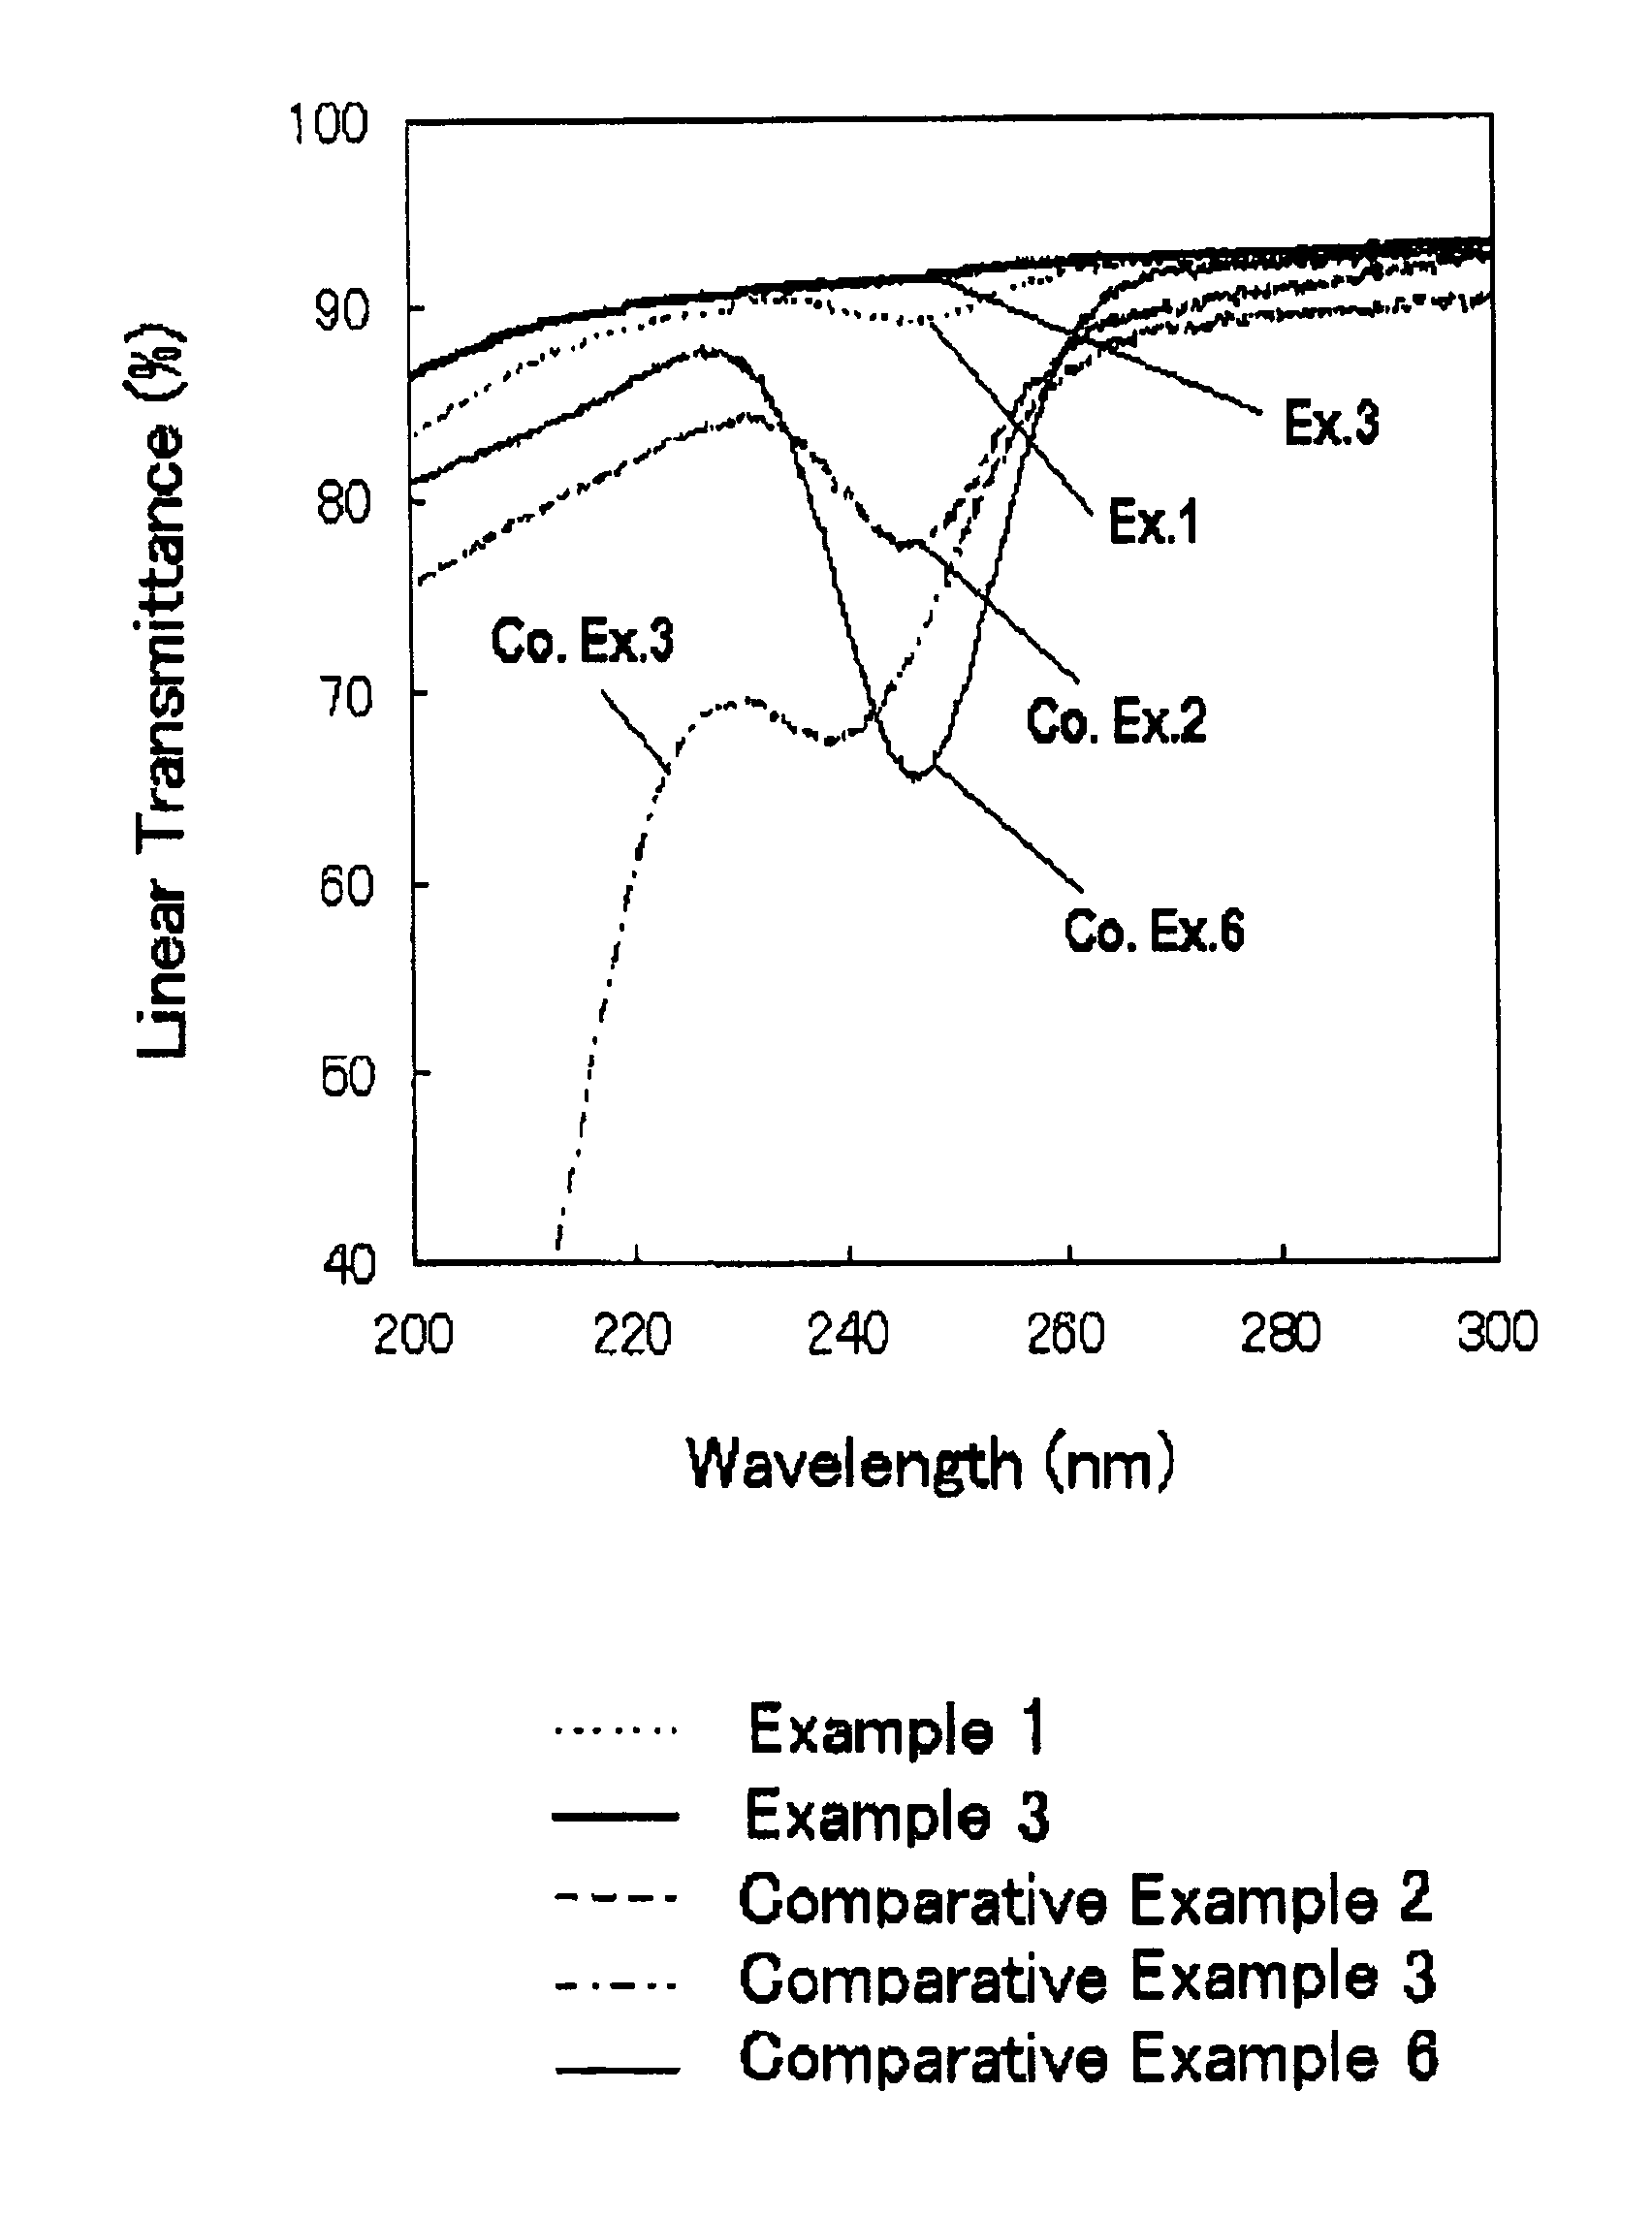 Fused silica glass and process for producing the same